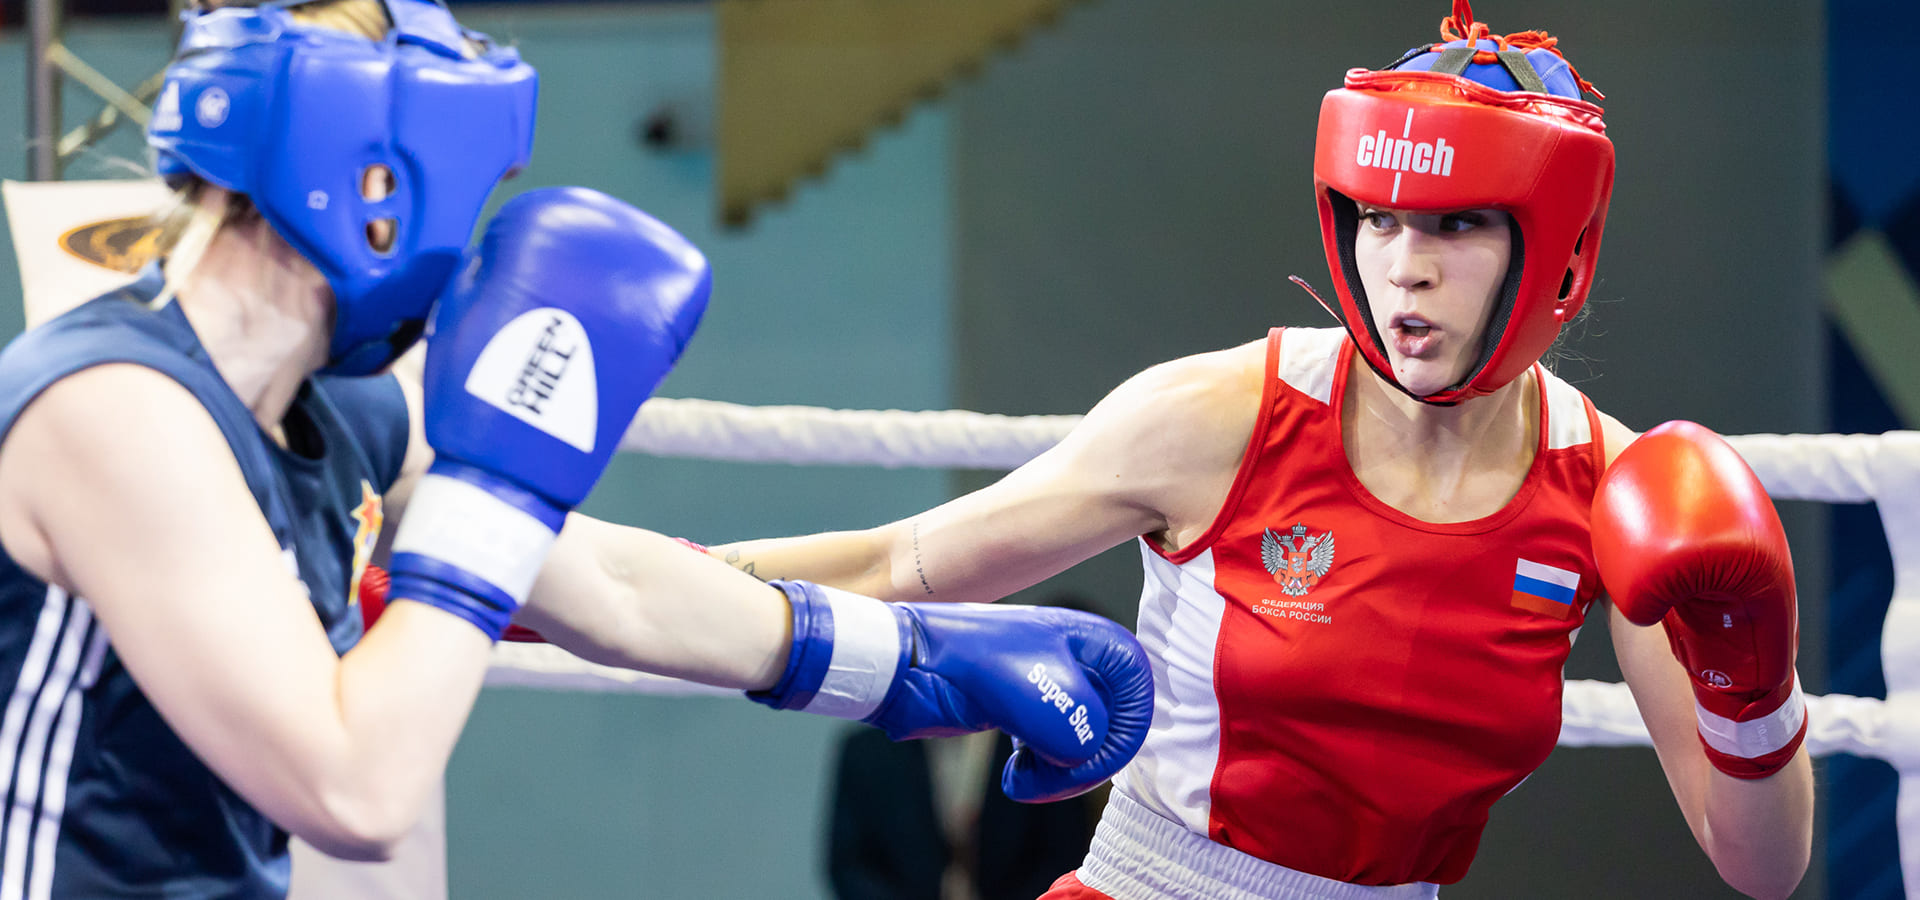 Oil Countries Boxing Cup is undergoing in Nizhnevartovsk